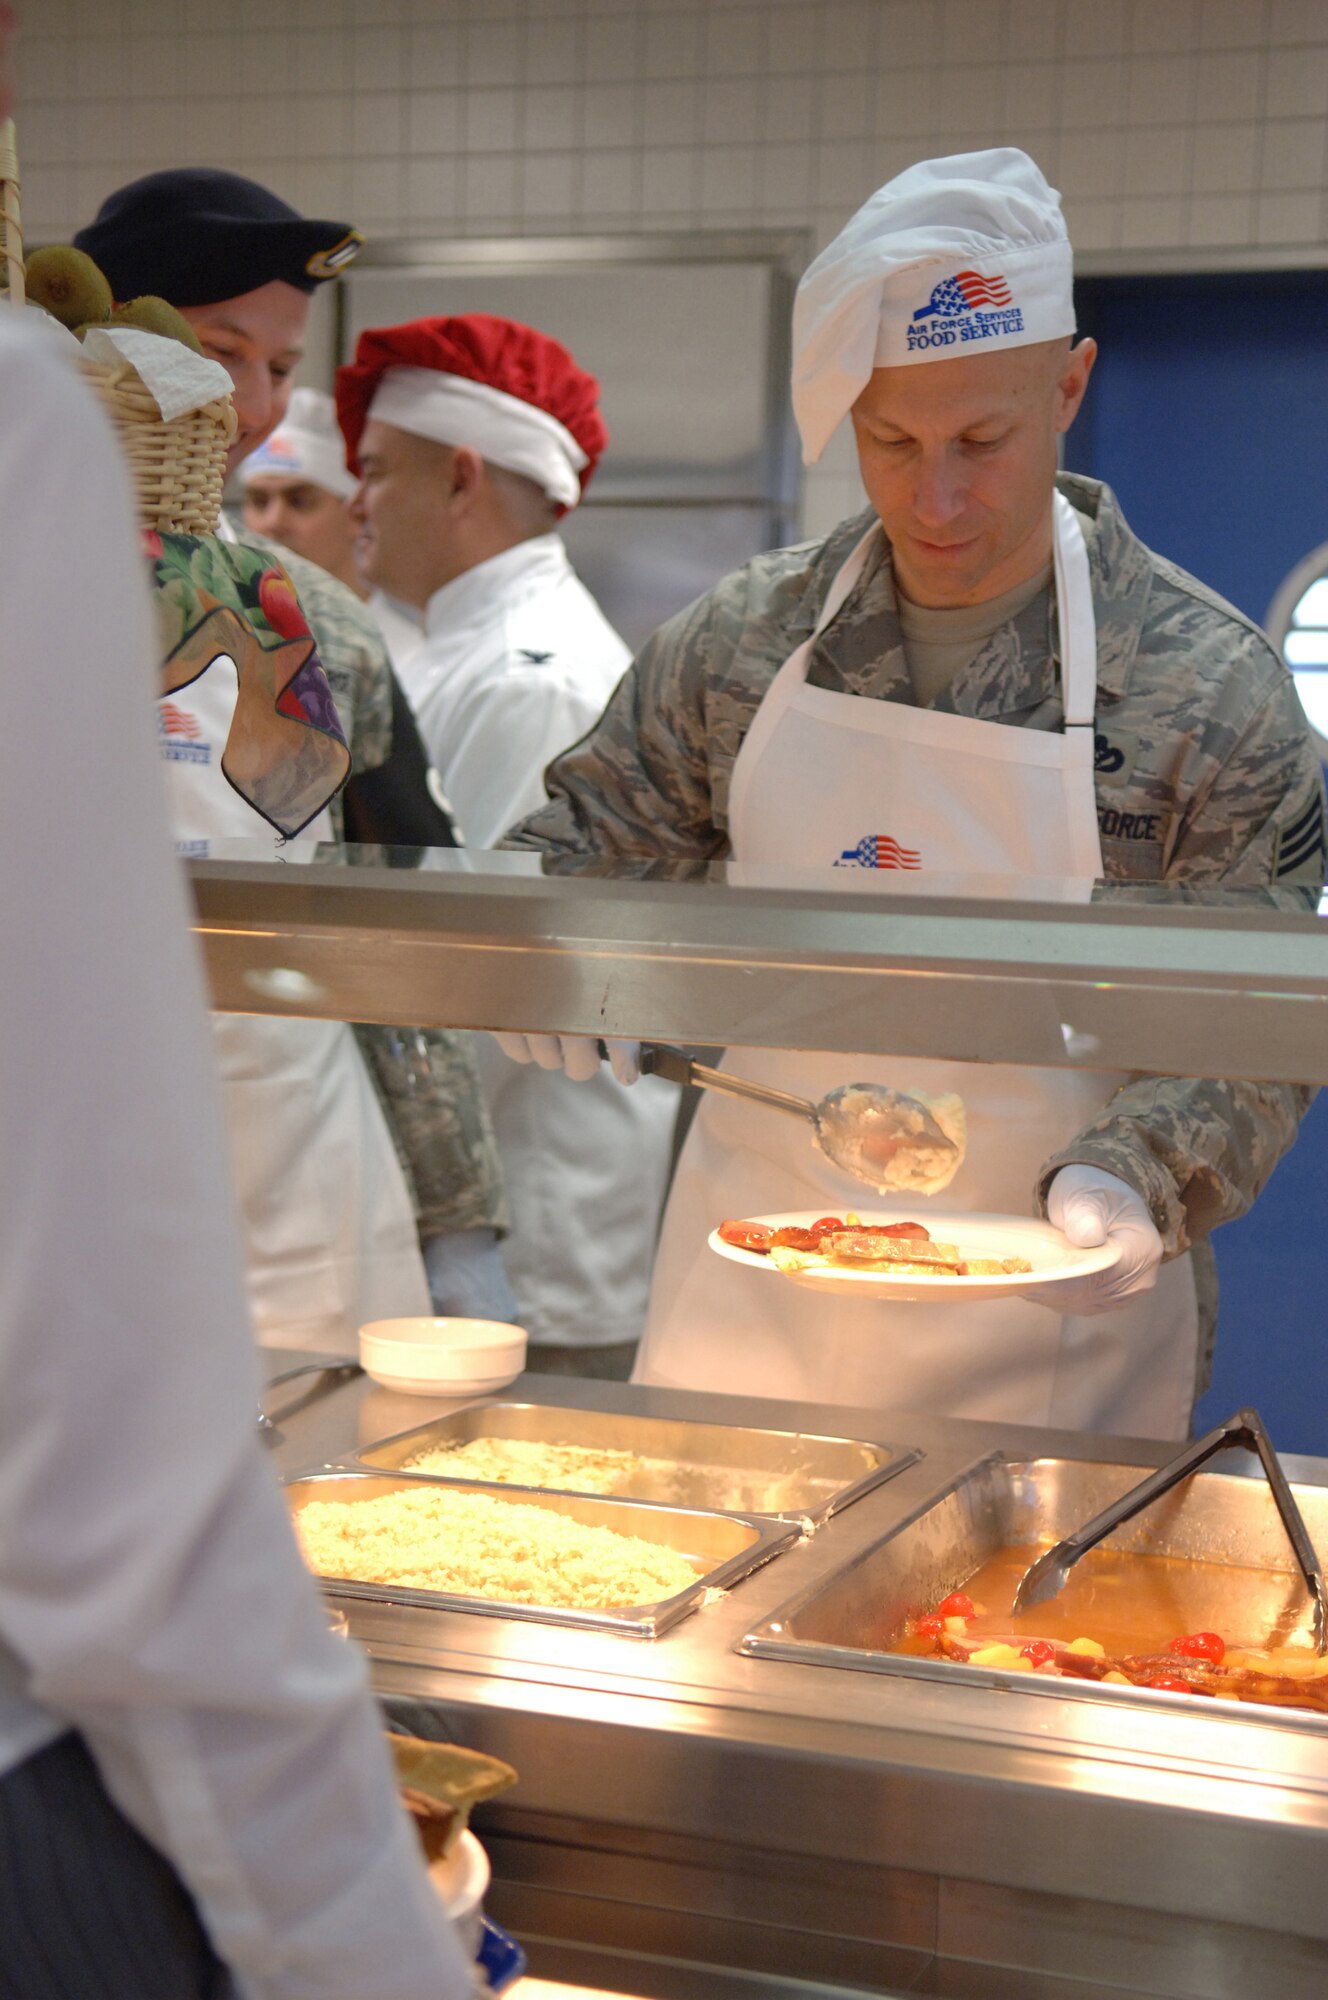 Chief Master Sgt. Dale Brocious, 431st Air Base Group, serves mashed potatoes to a patron of the Lindberg Hof Dining Facility during Thanksgiving meal, Kapaun Air Station, Germany, Nov. 27, 2008. (U.S. Air Force photo by Senior Airman Levi Riendeau)